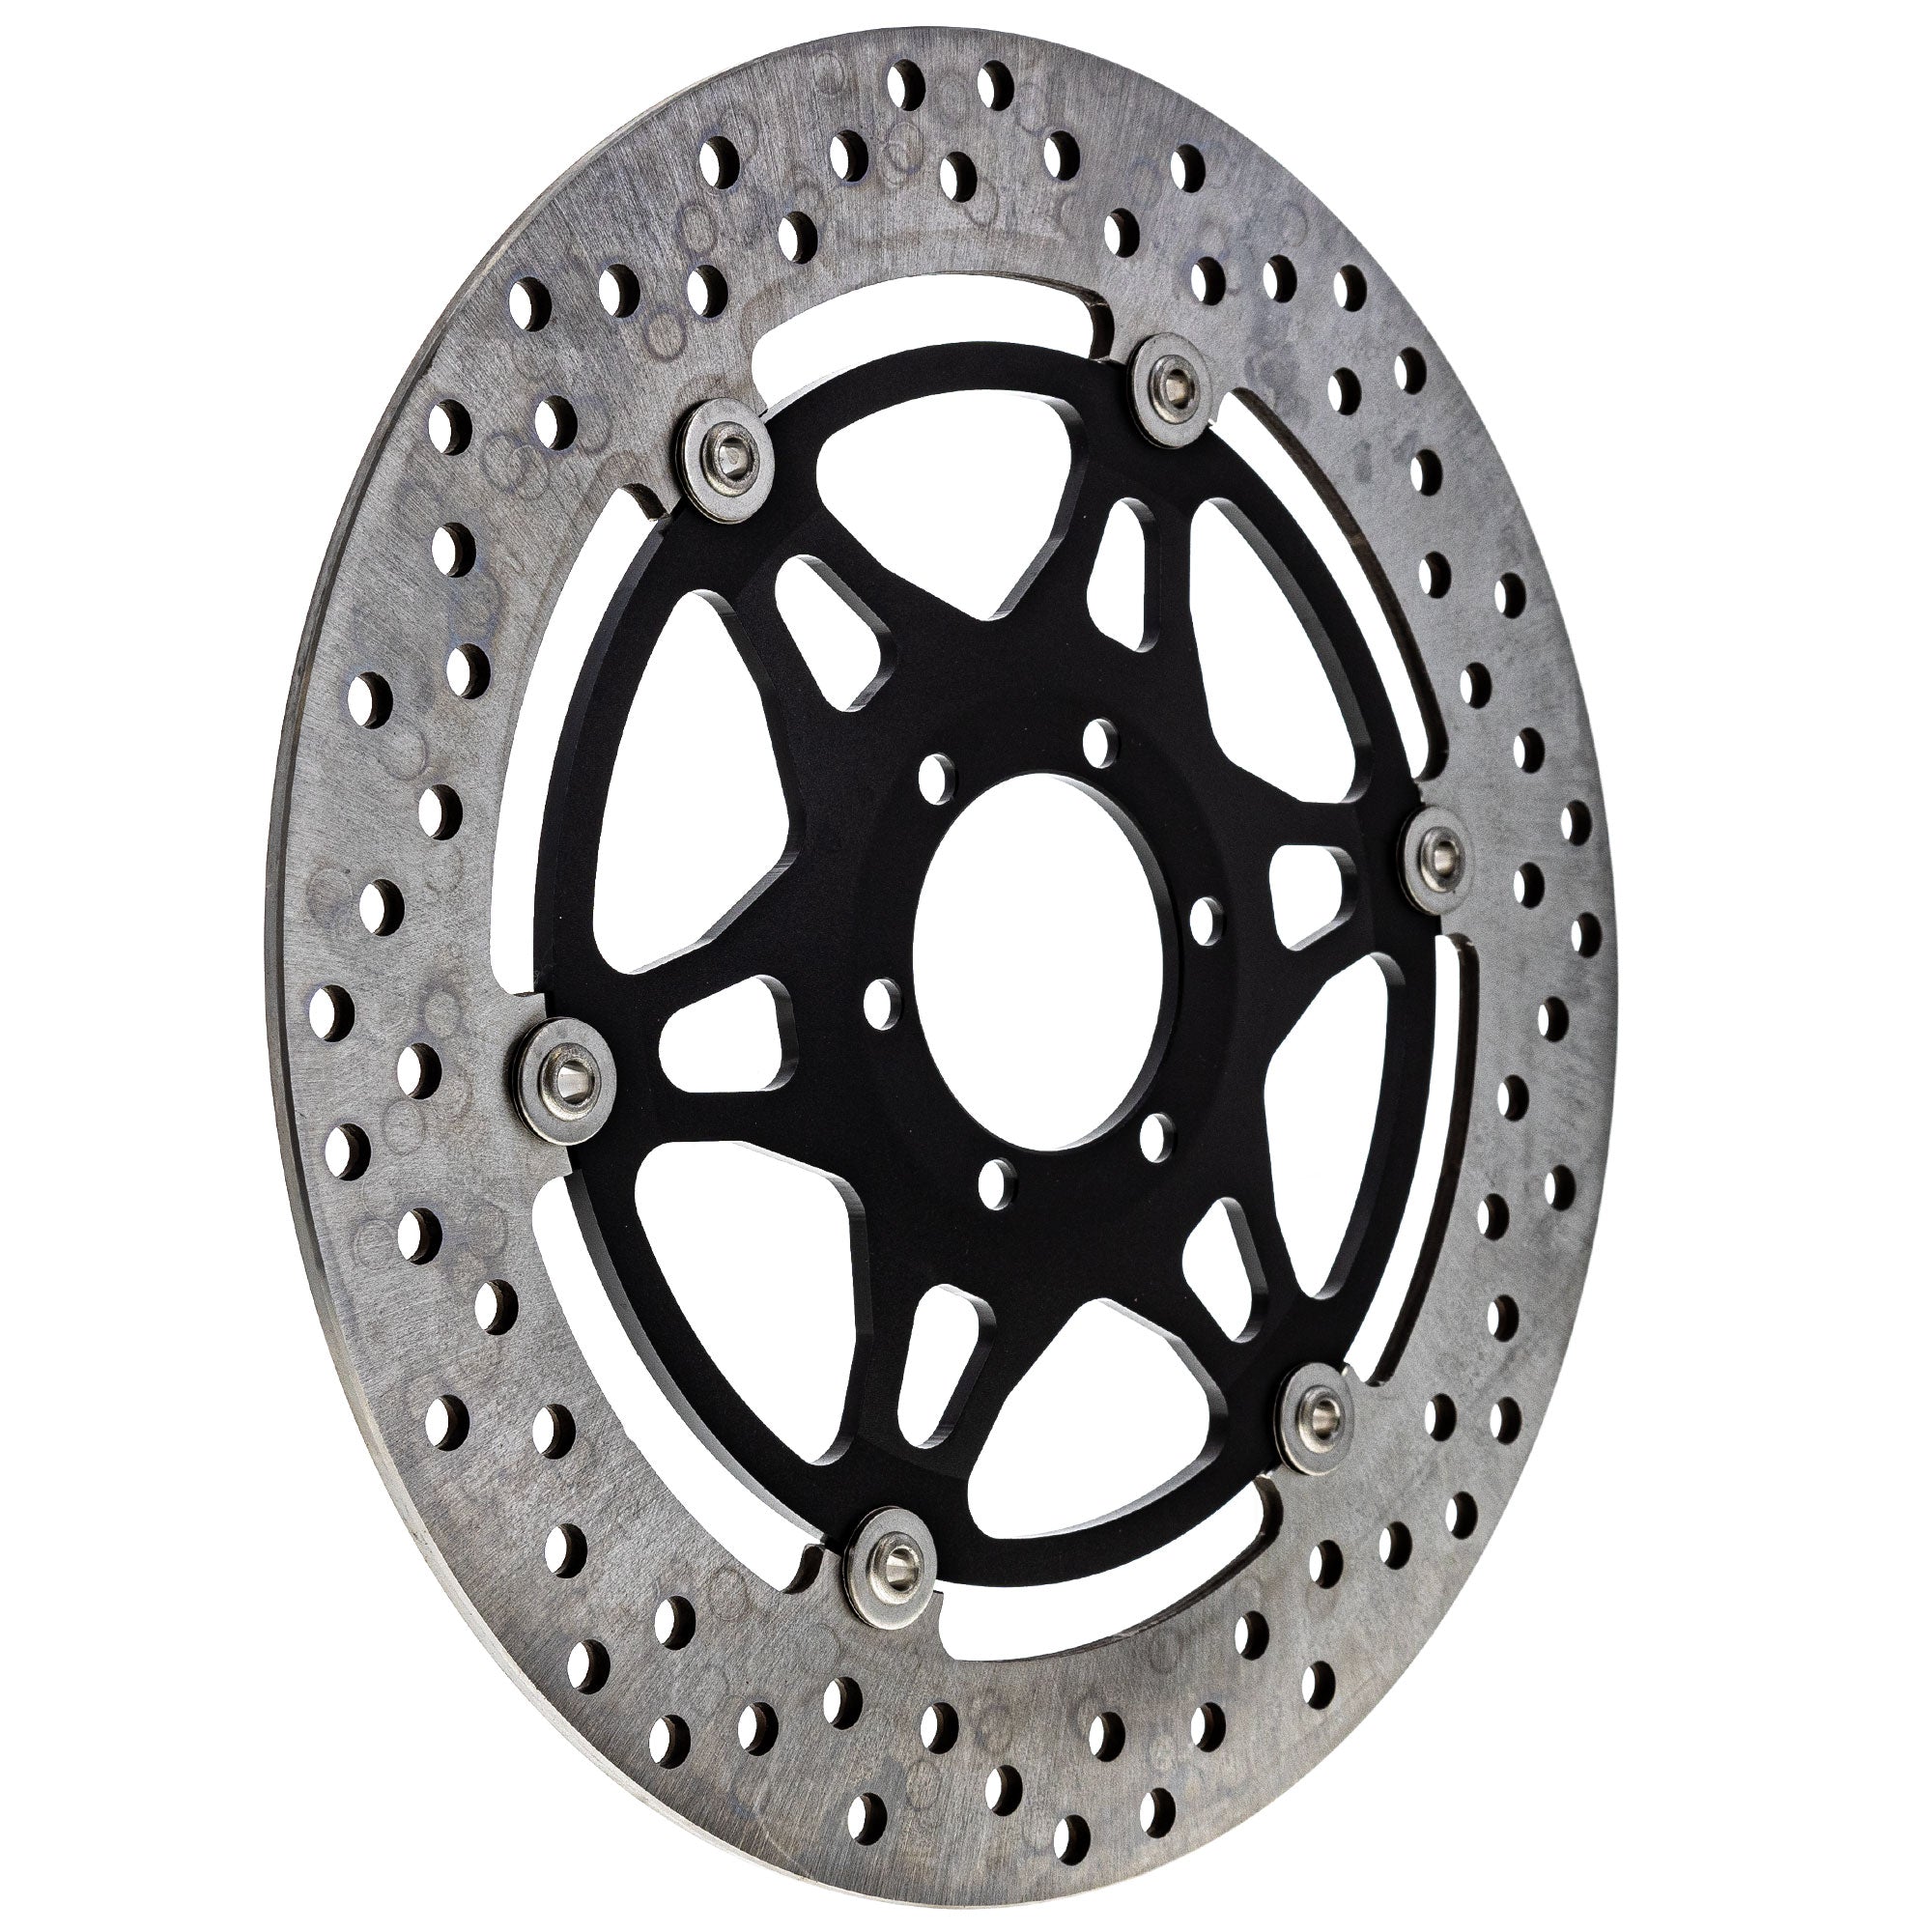 Front Brake Rotor for Ducati 748R 996R 49240101A Motorcycle